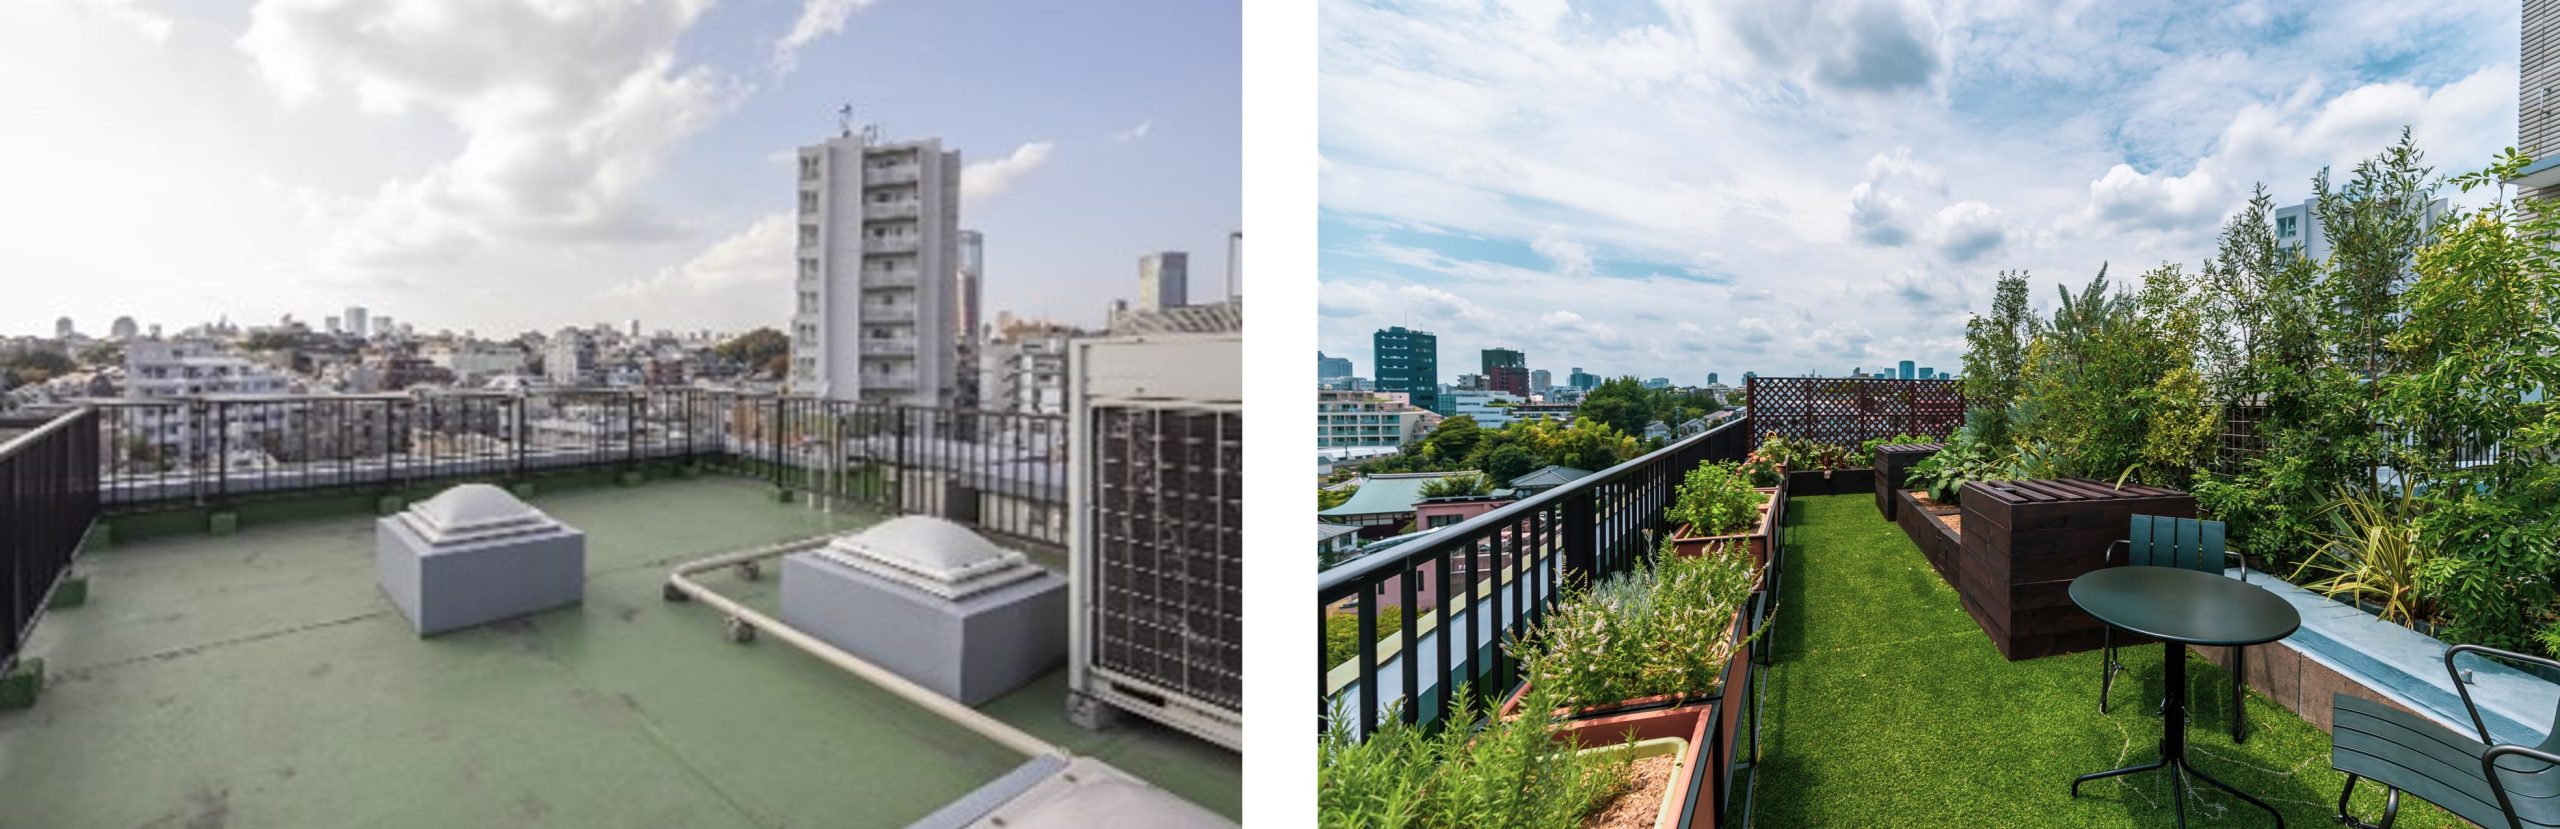 ▲Rooftop Farm　Before After